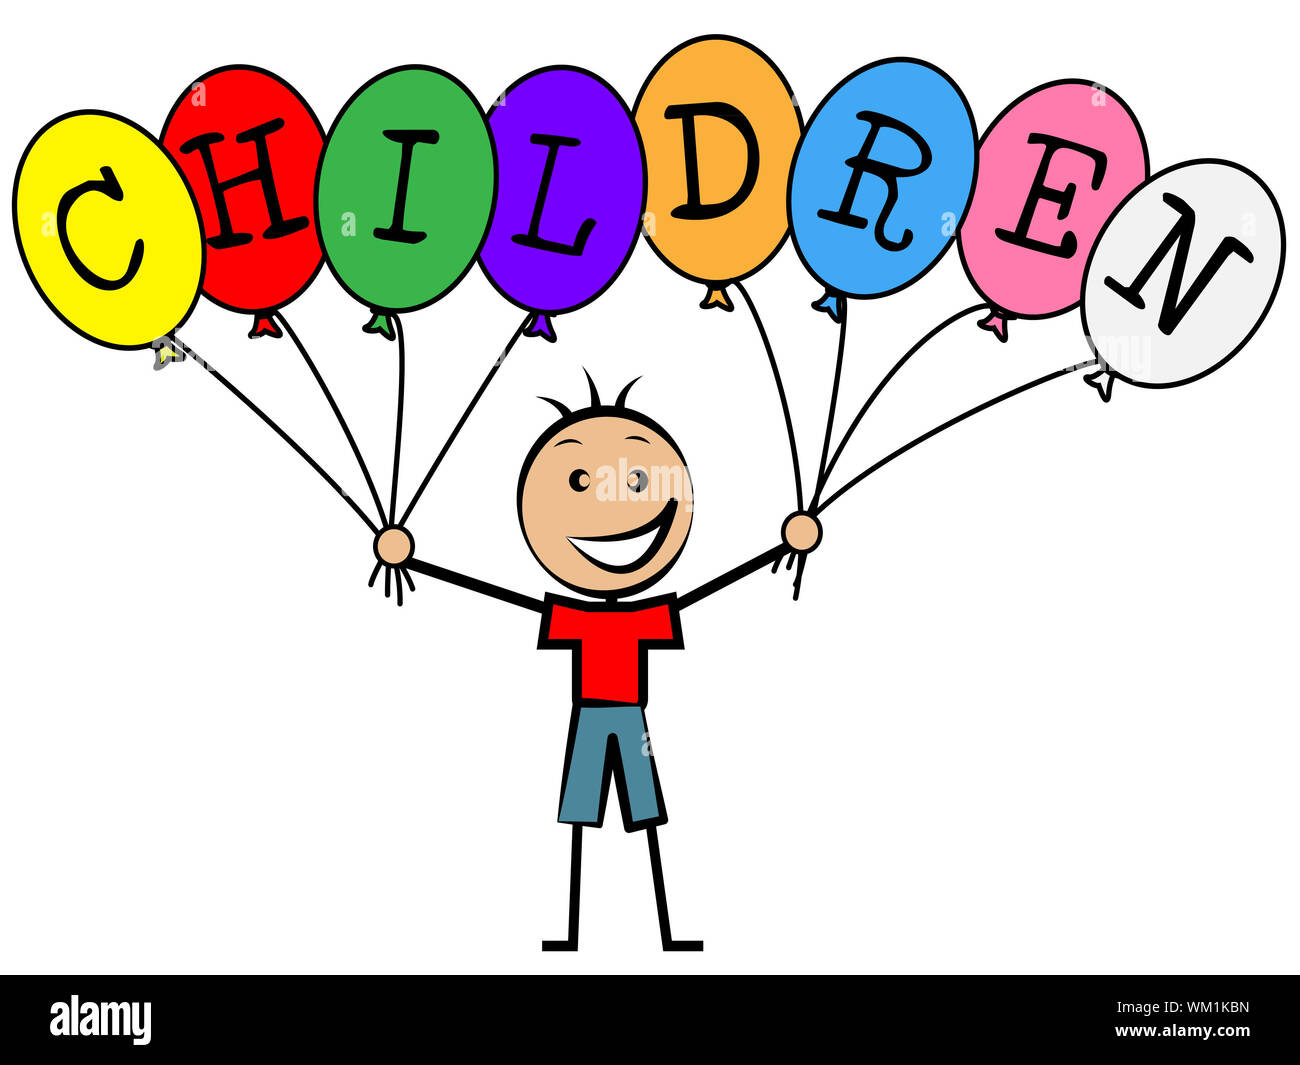 Children Balloons Meaning Decoration Youths And Youngster Stock Photo